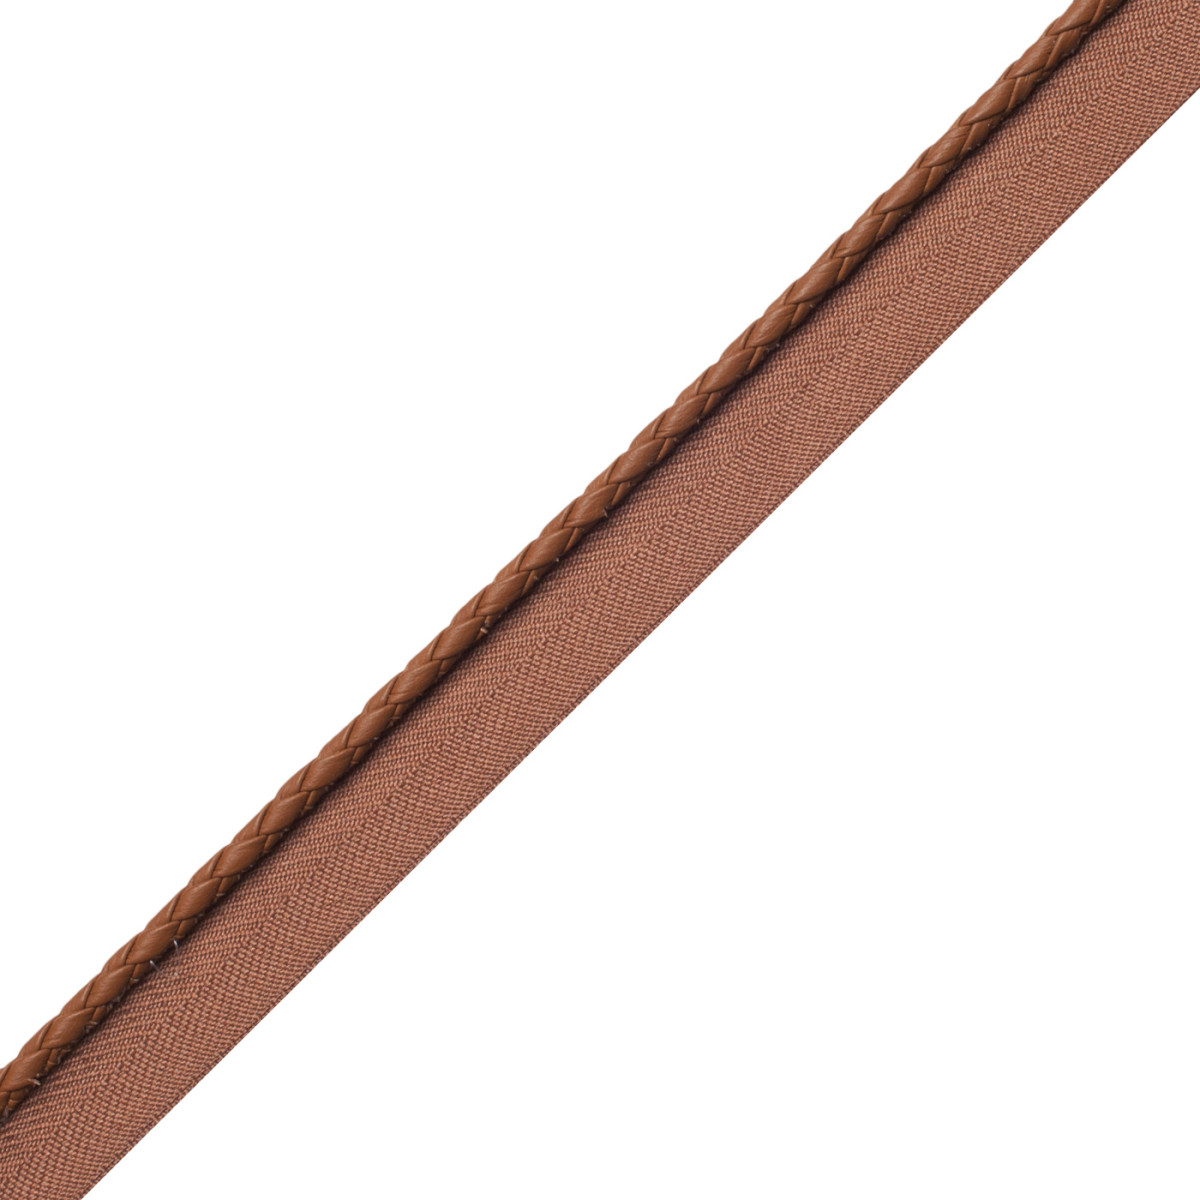 BRAIDED LEATHER CORD WITH TAPE - SORREL - Samuel and Sons